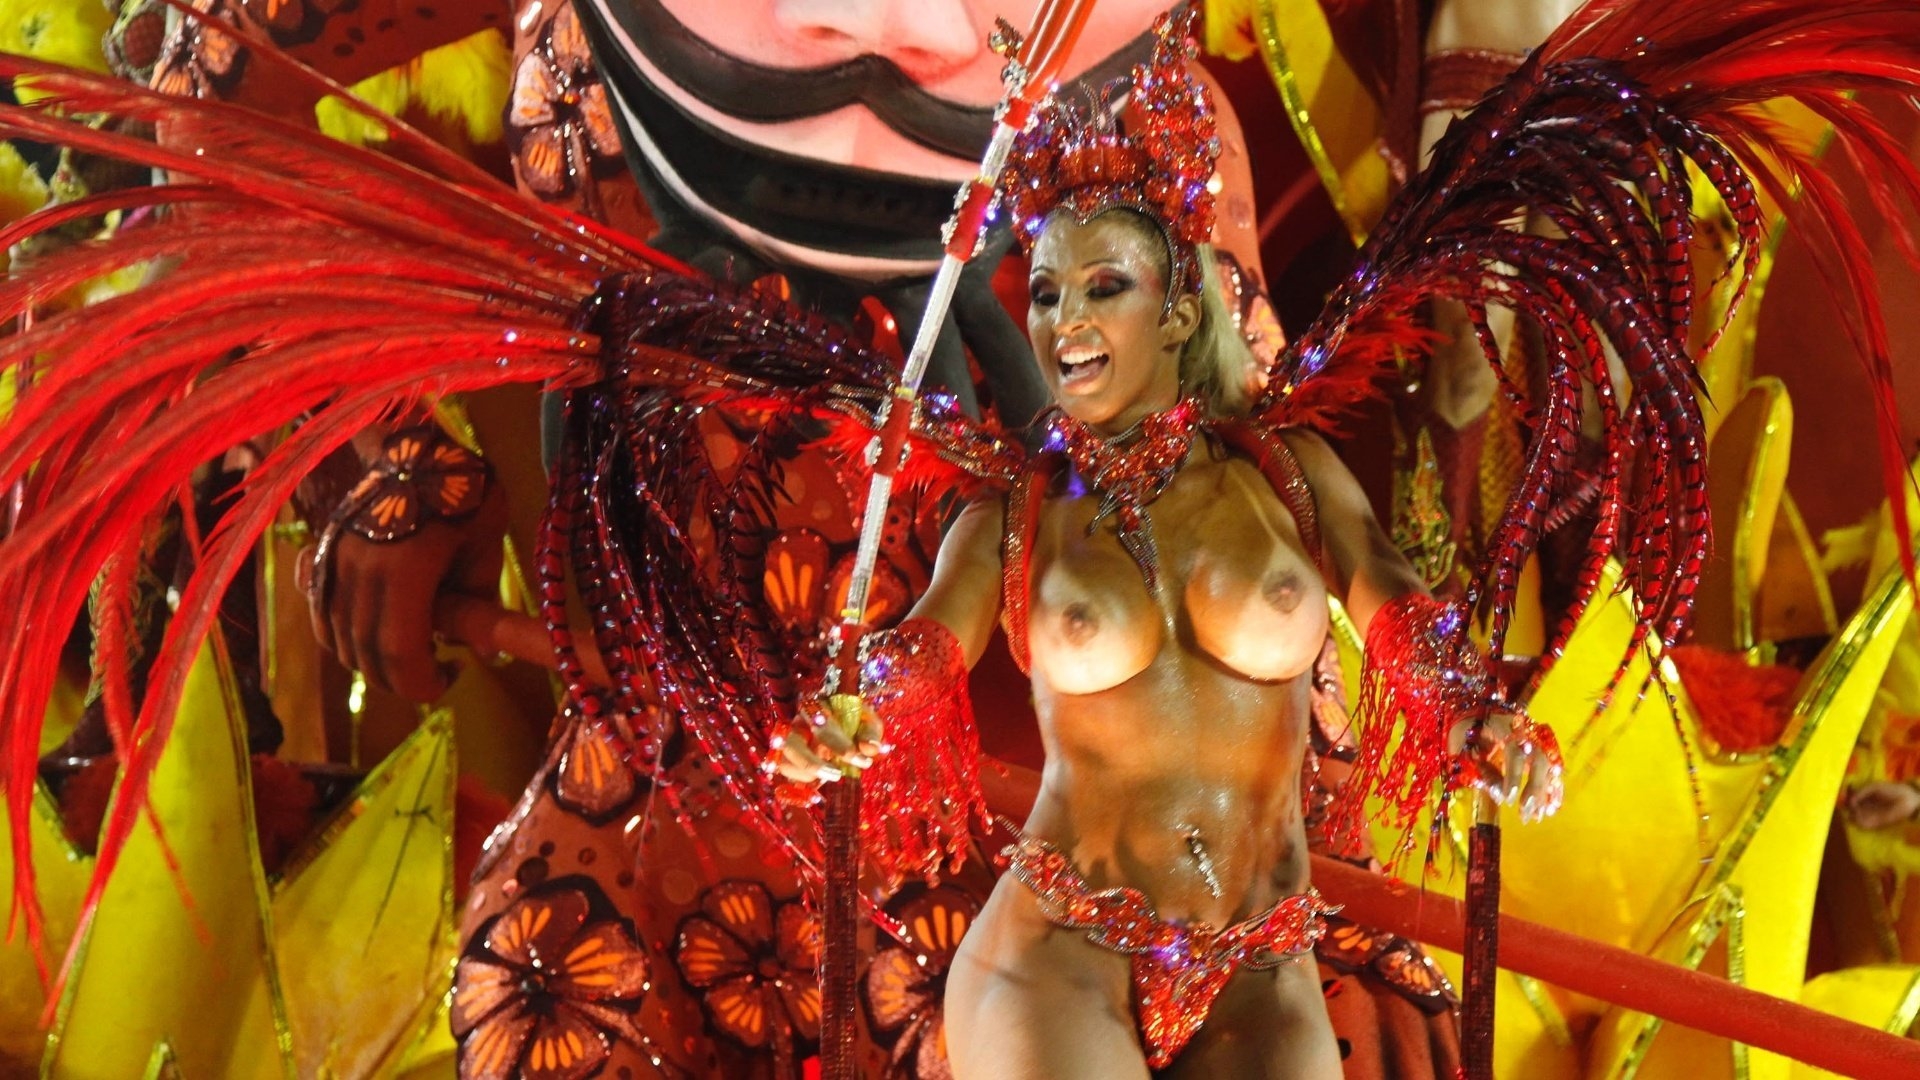 Sinful Samba: 20 Sexy Images of O Que Significa o Carnaval Festivities